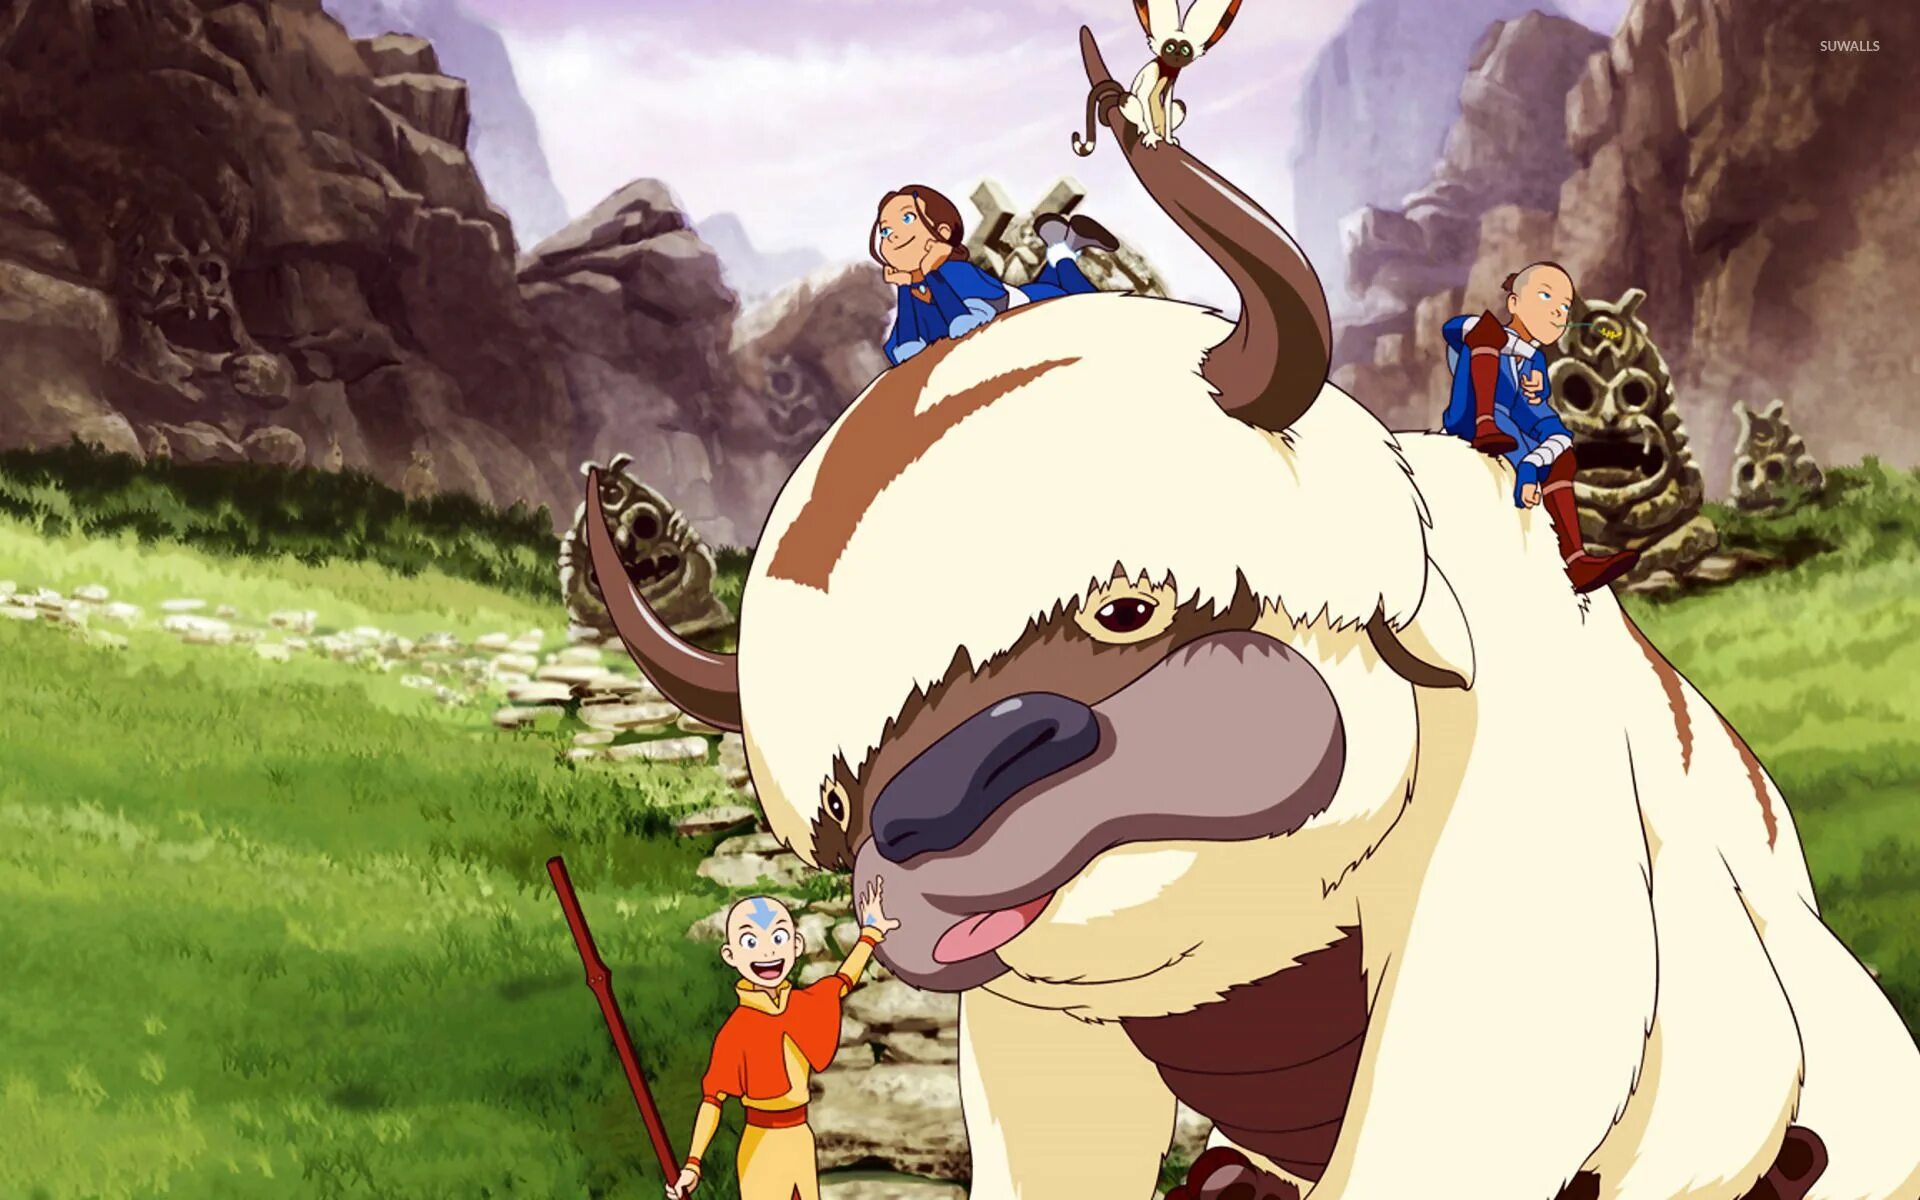 Аватар аанг. Avatar the last Airbender Appa. Avatar the last airbender series